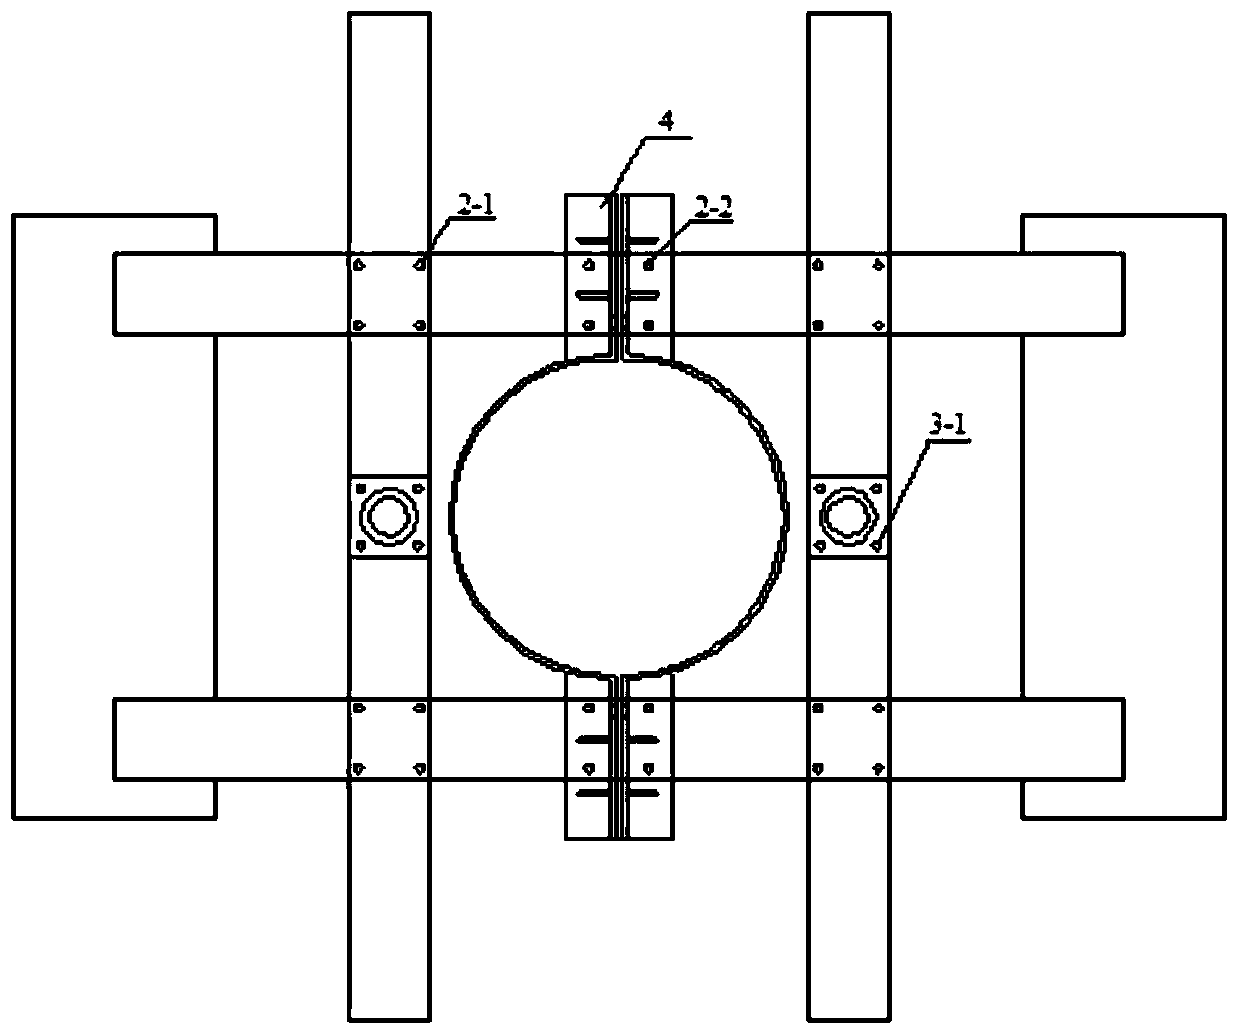 A centering positioning device for connecting piles